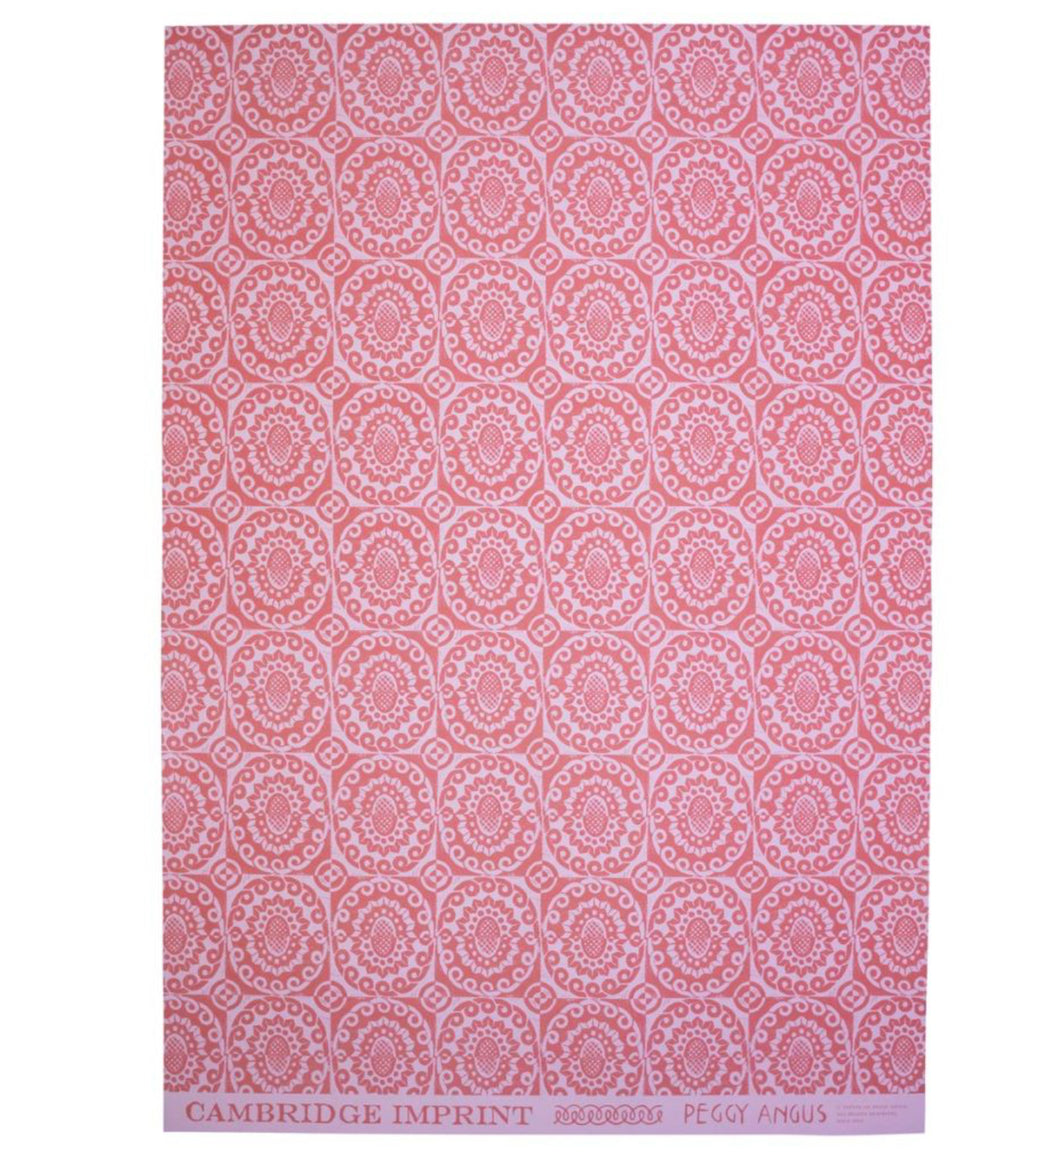 Cambridge Imprint Patterned Paper - Pineapple by Peggy Angus